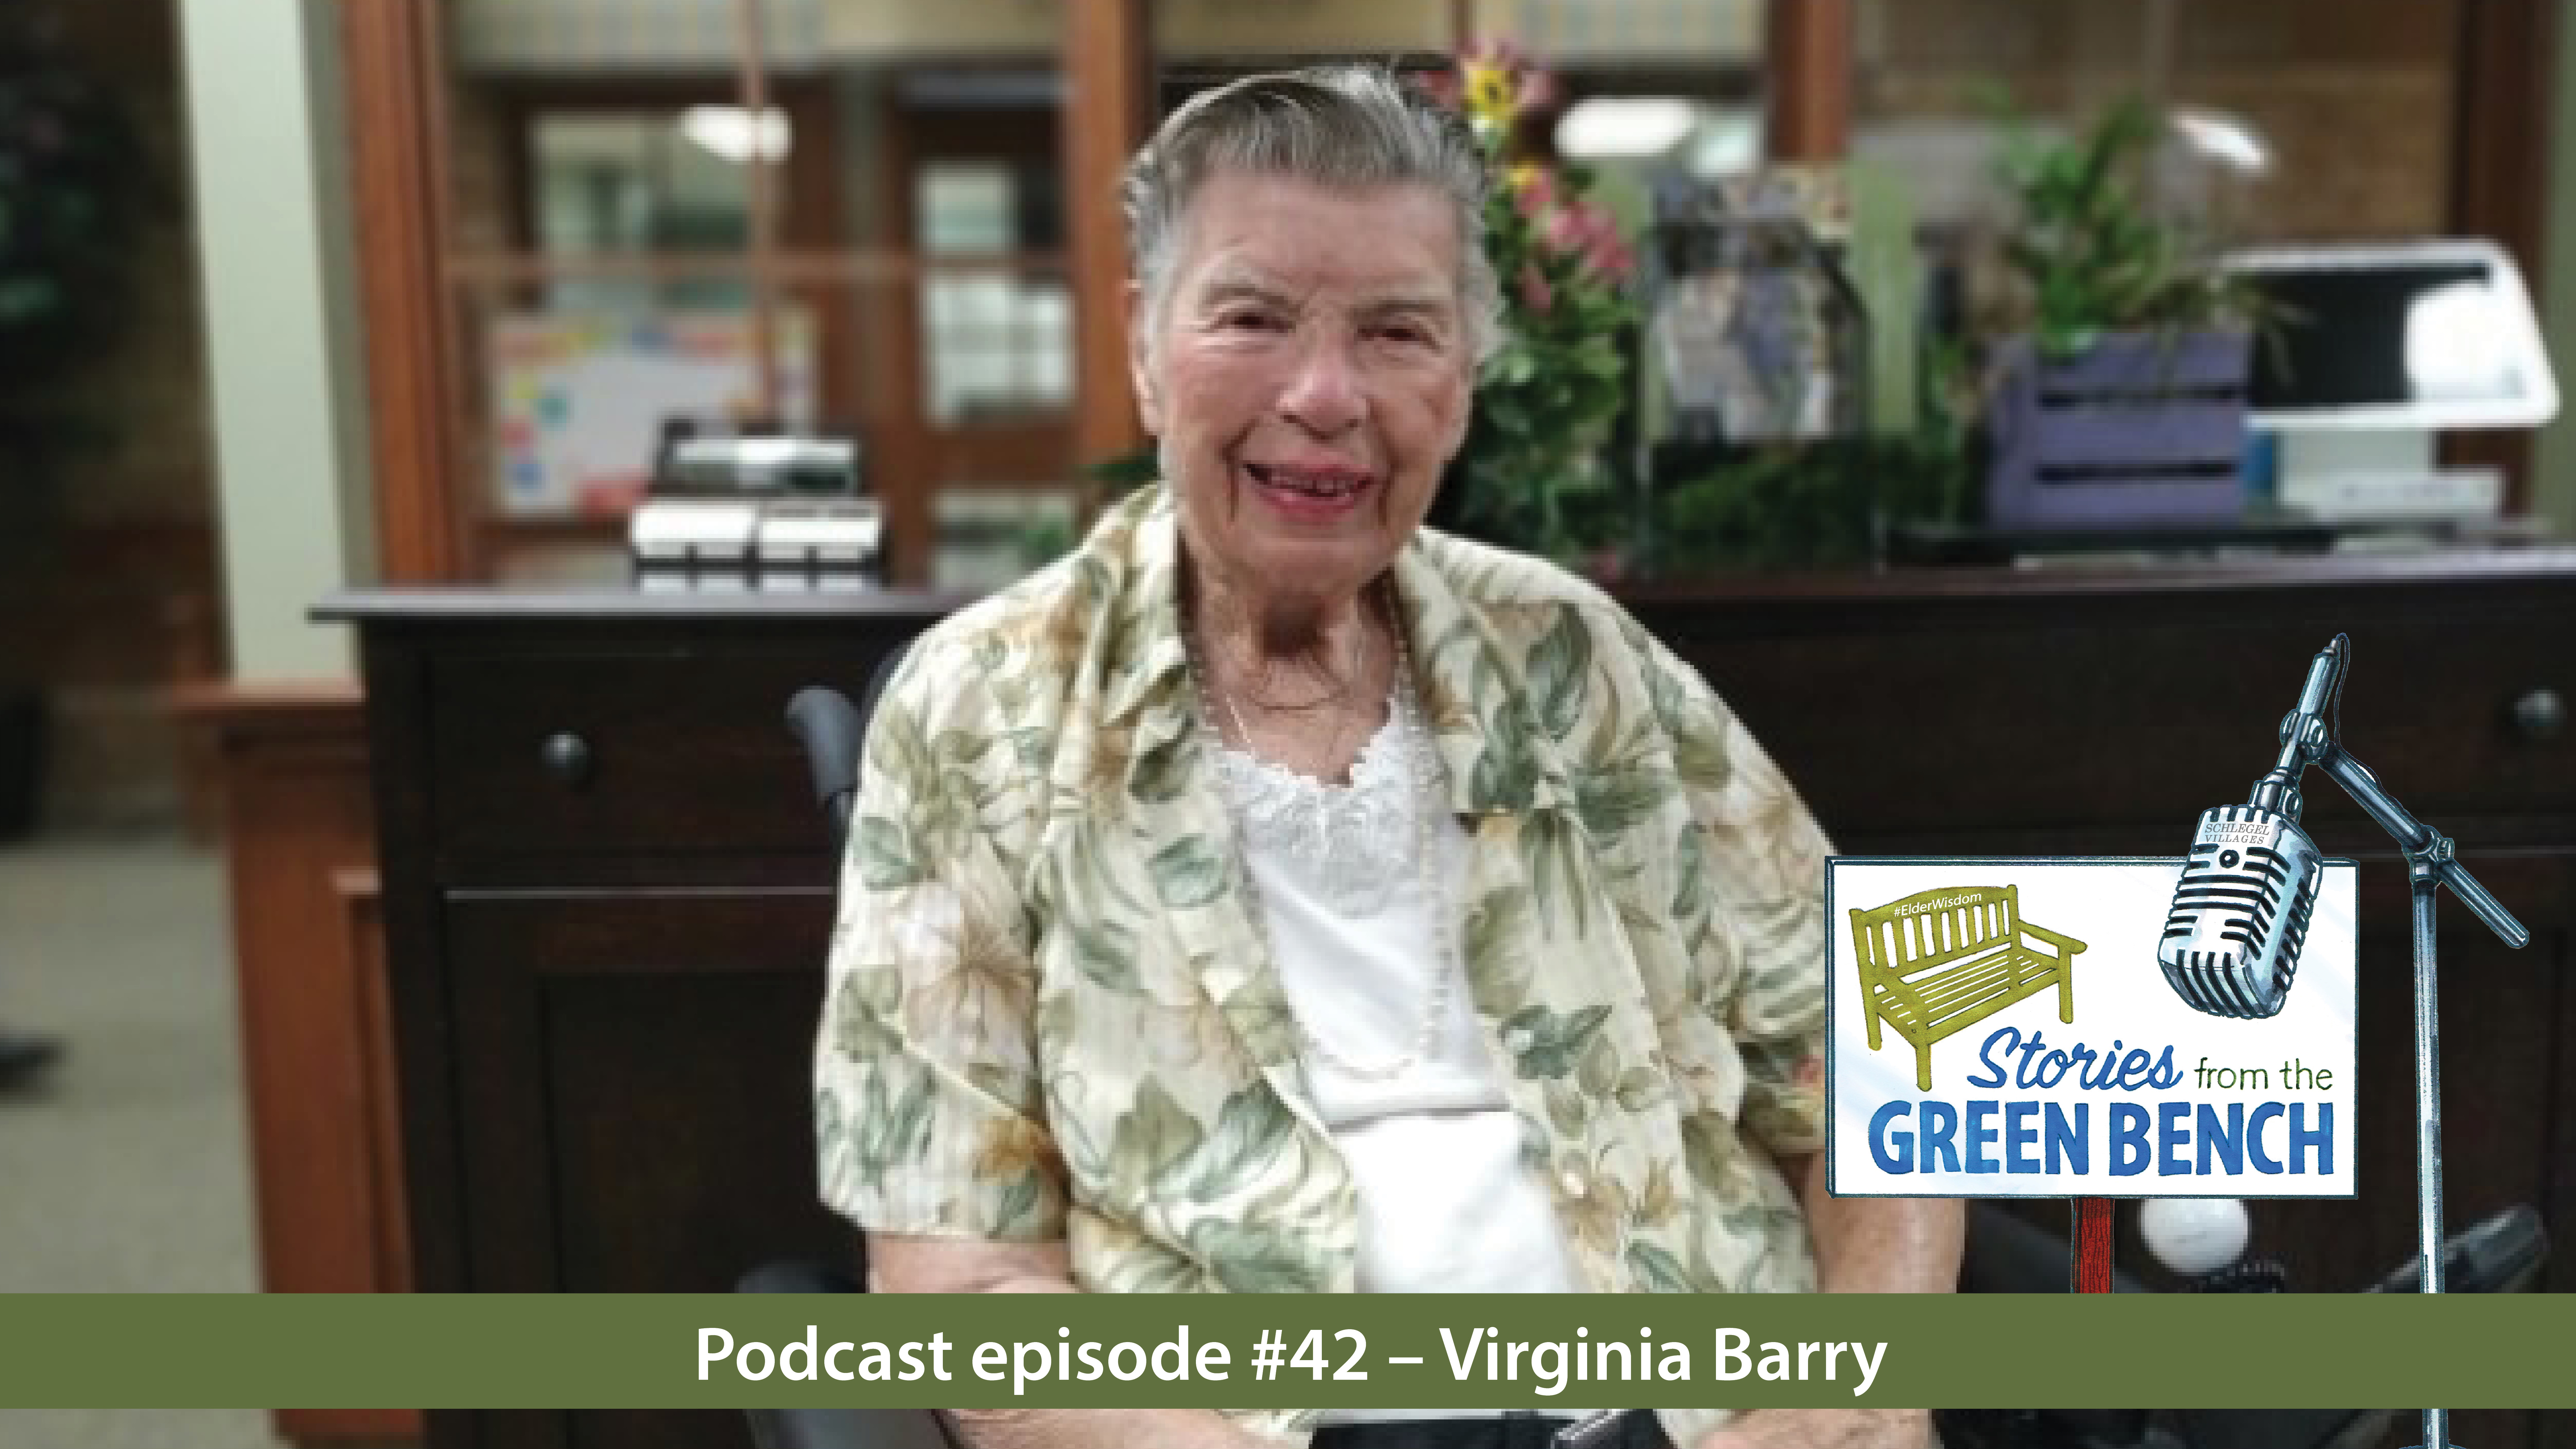 Virginia Barry shares her story from the green bench on the #ElderWisdom podcast